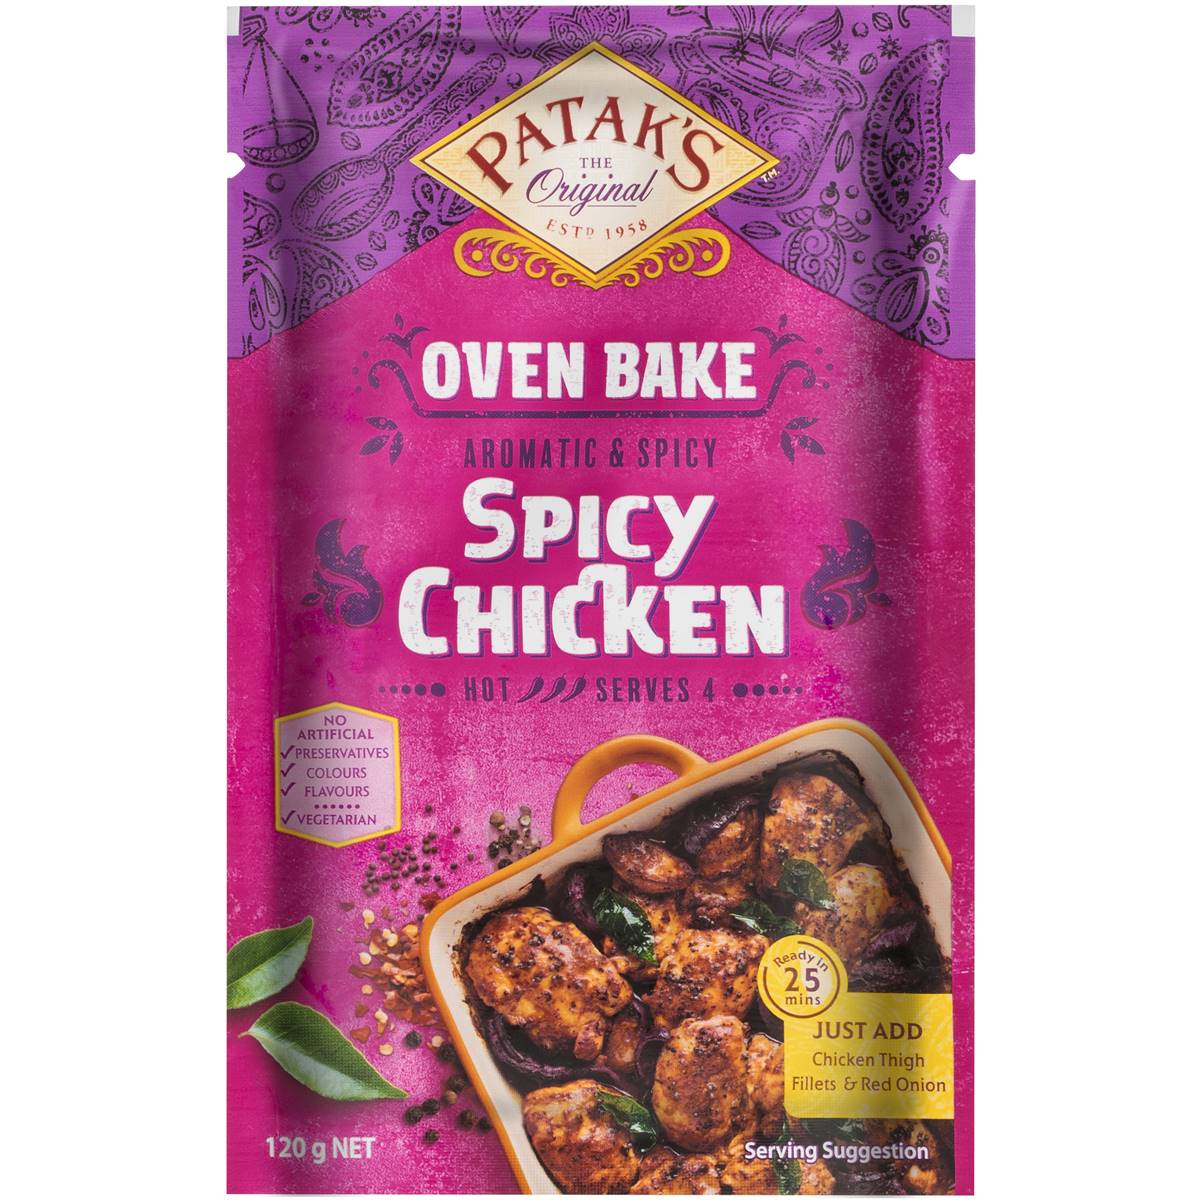 Calories in Patak's Spicy Chicken Oven Bake Bake